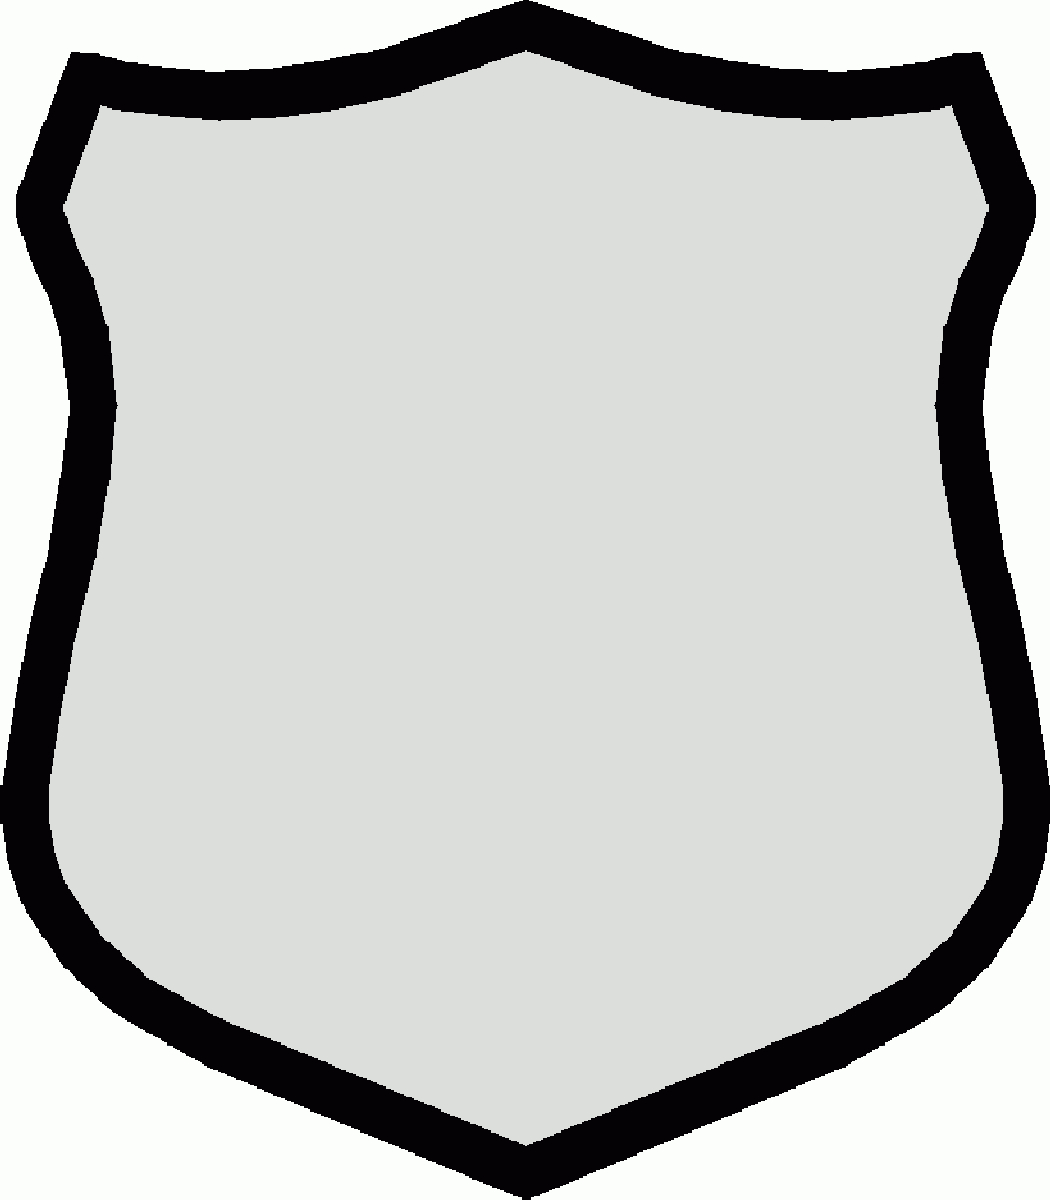 Shield Template Clipart | Free Download Best Shield Template Inside Blank Shield Template Printable